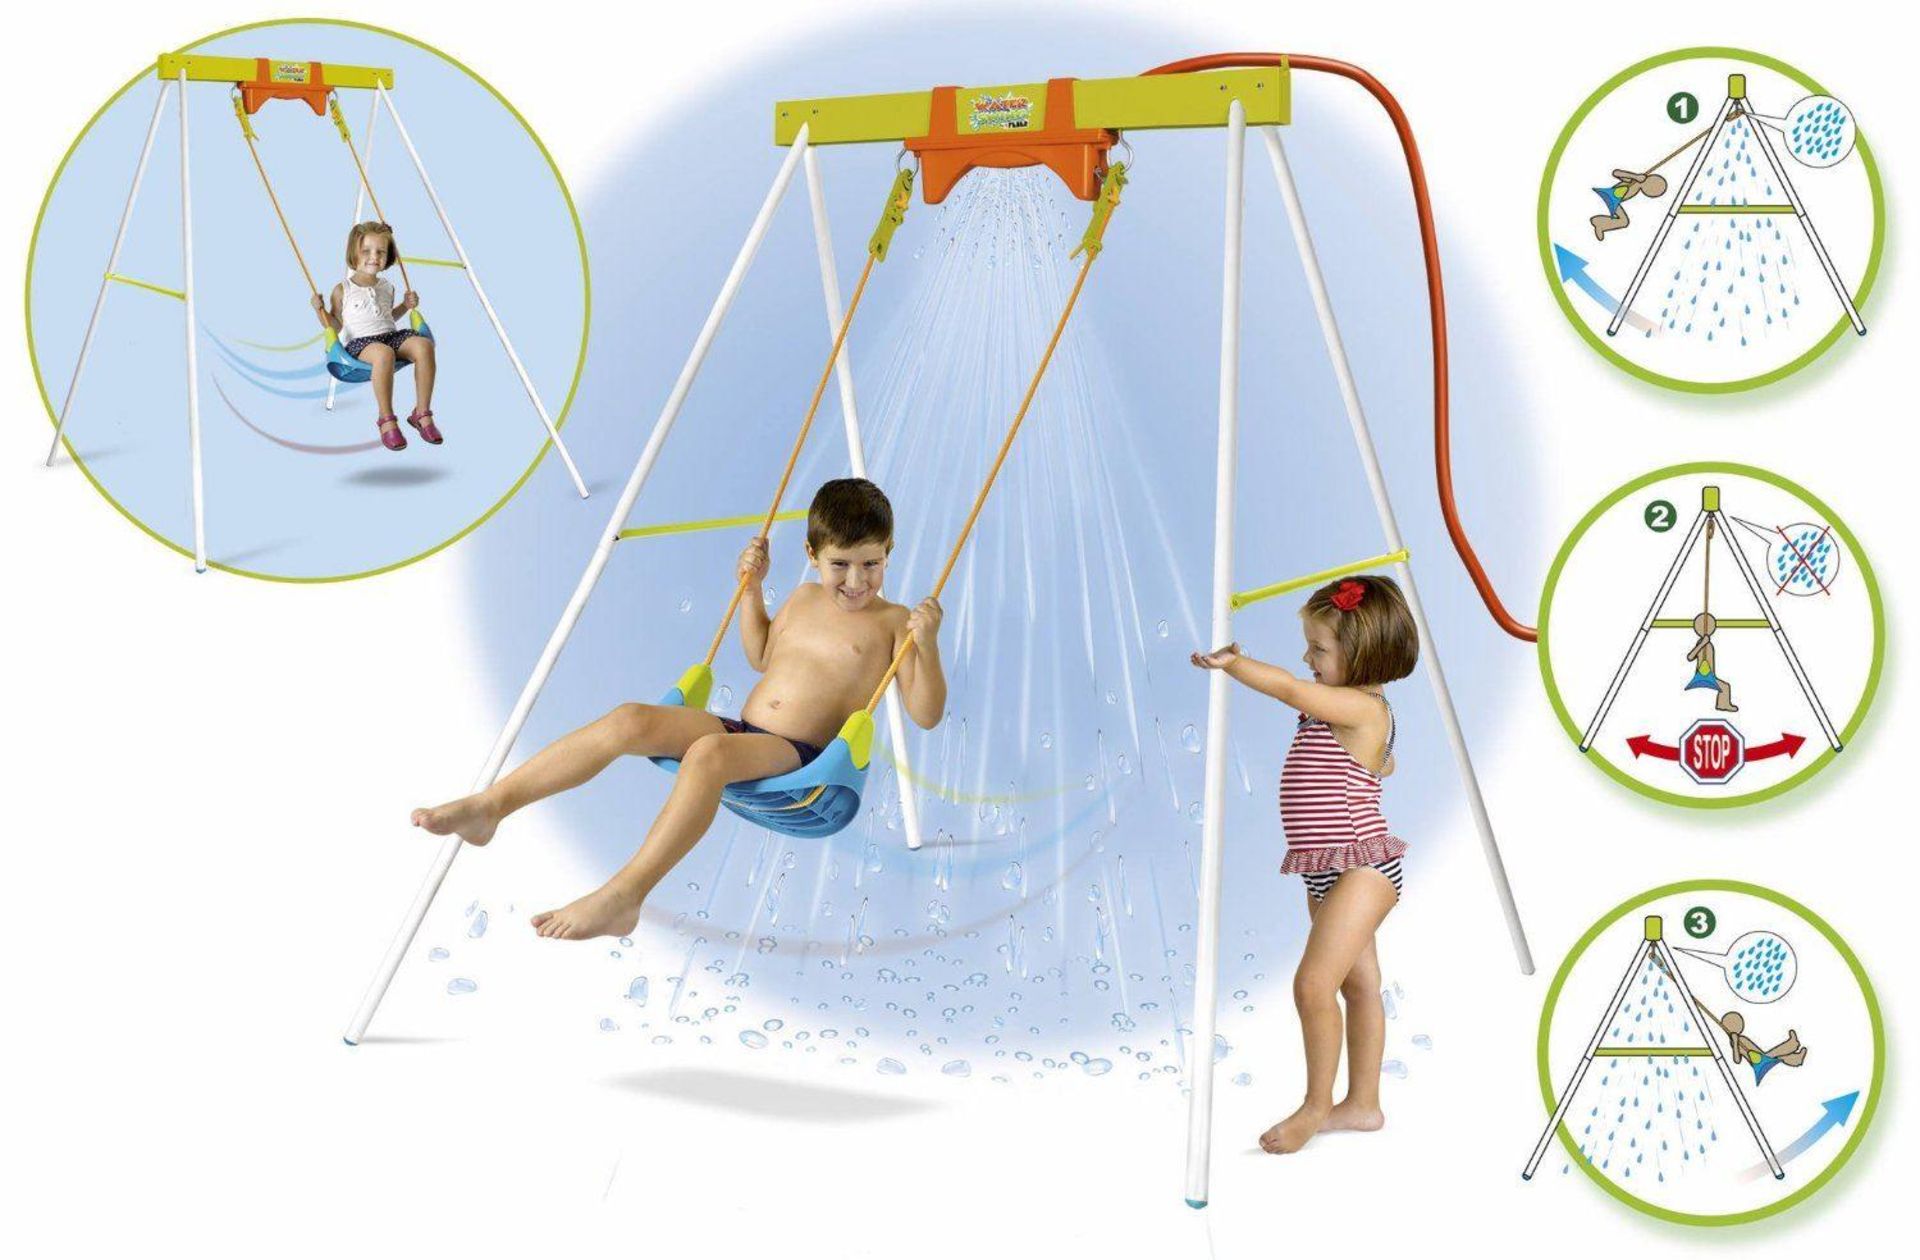 V Brand New Feber complete Outdoor Swing With water Spray Attachment Littlewoods Price £64.99